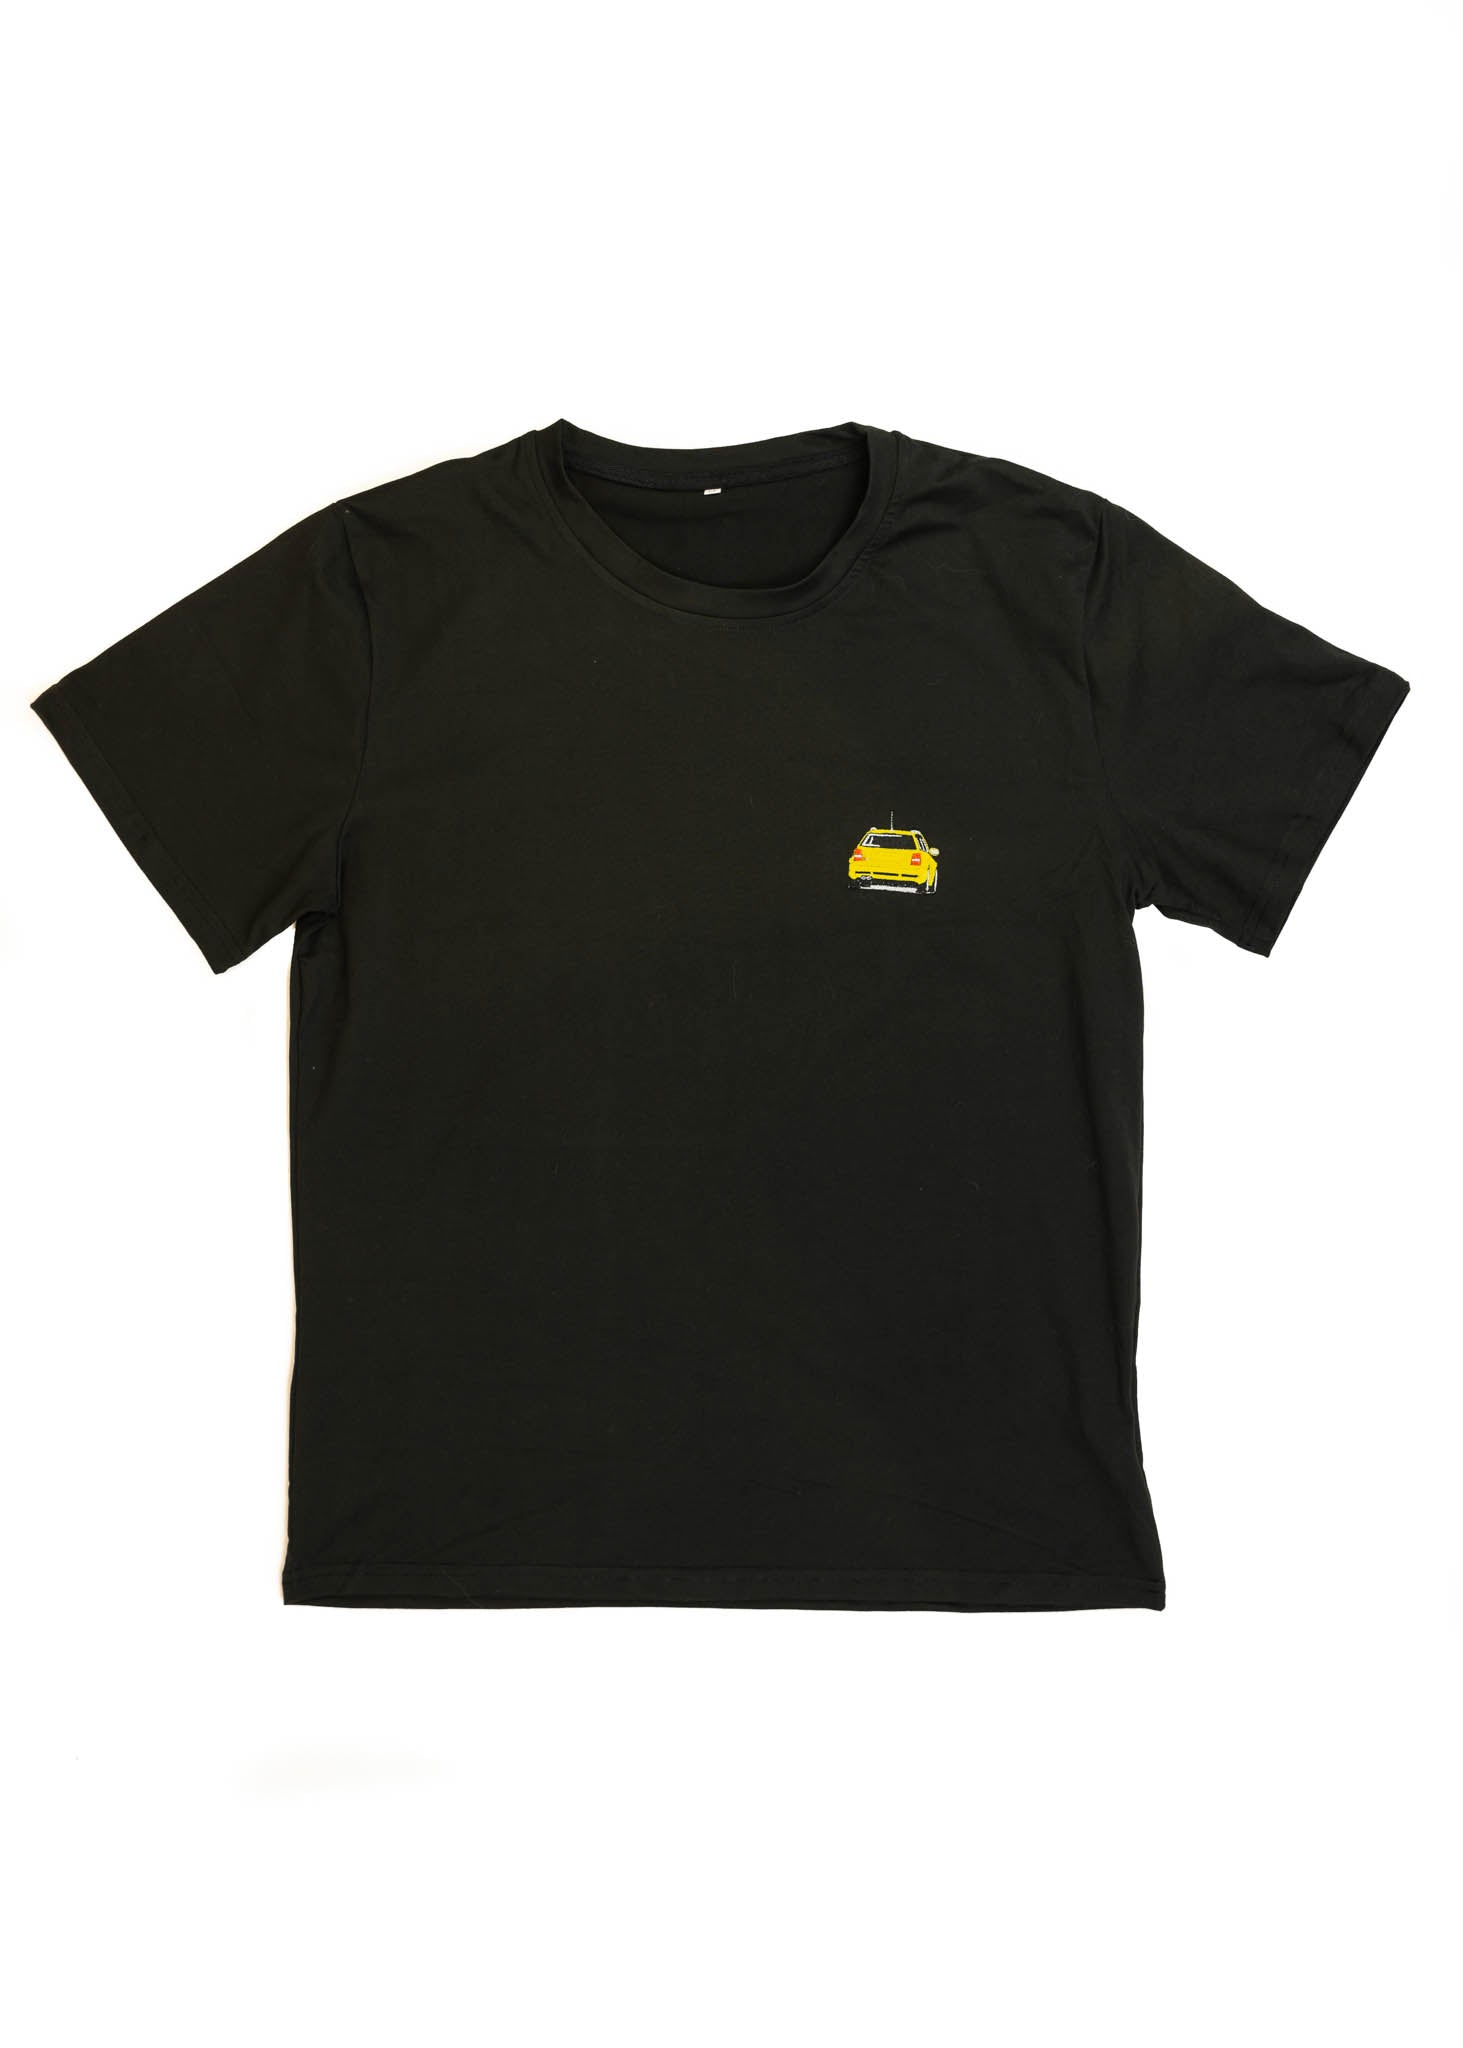 A black Audi t-shirt for men. Photo is a front view of the shirt with an embroidered Imola Yellow Audi B5 RS4. Fabric composition is polyester, and cotton. The material is very soft, stretchy, non-transparent. The style of this shirt is short sleeve, with a crewneck neckline.